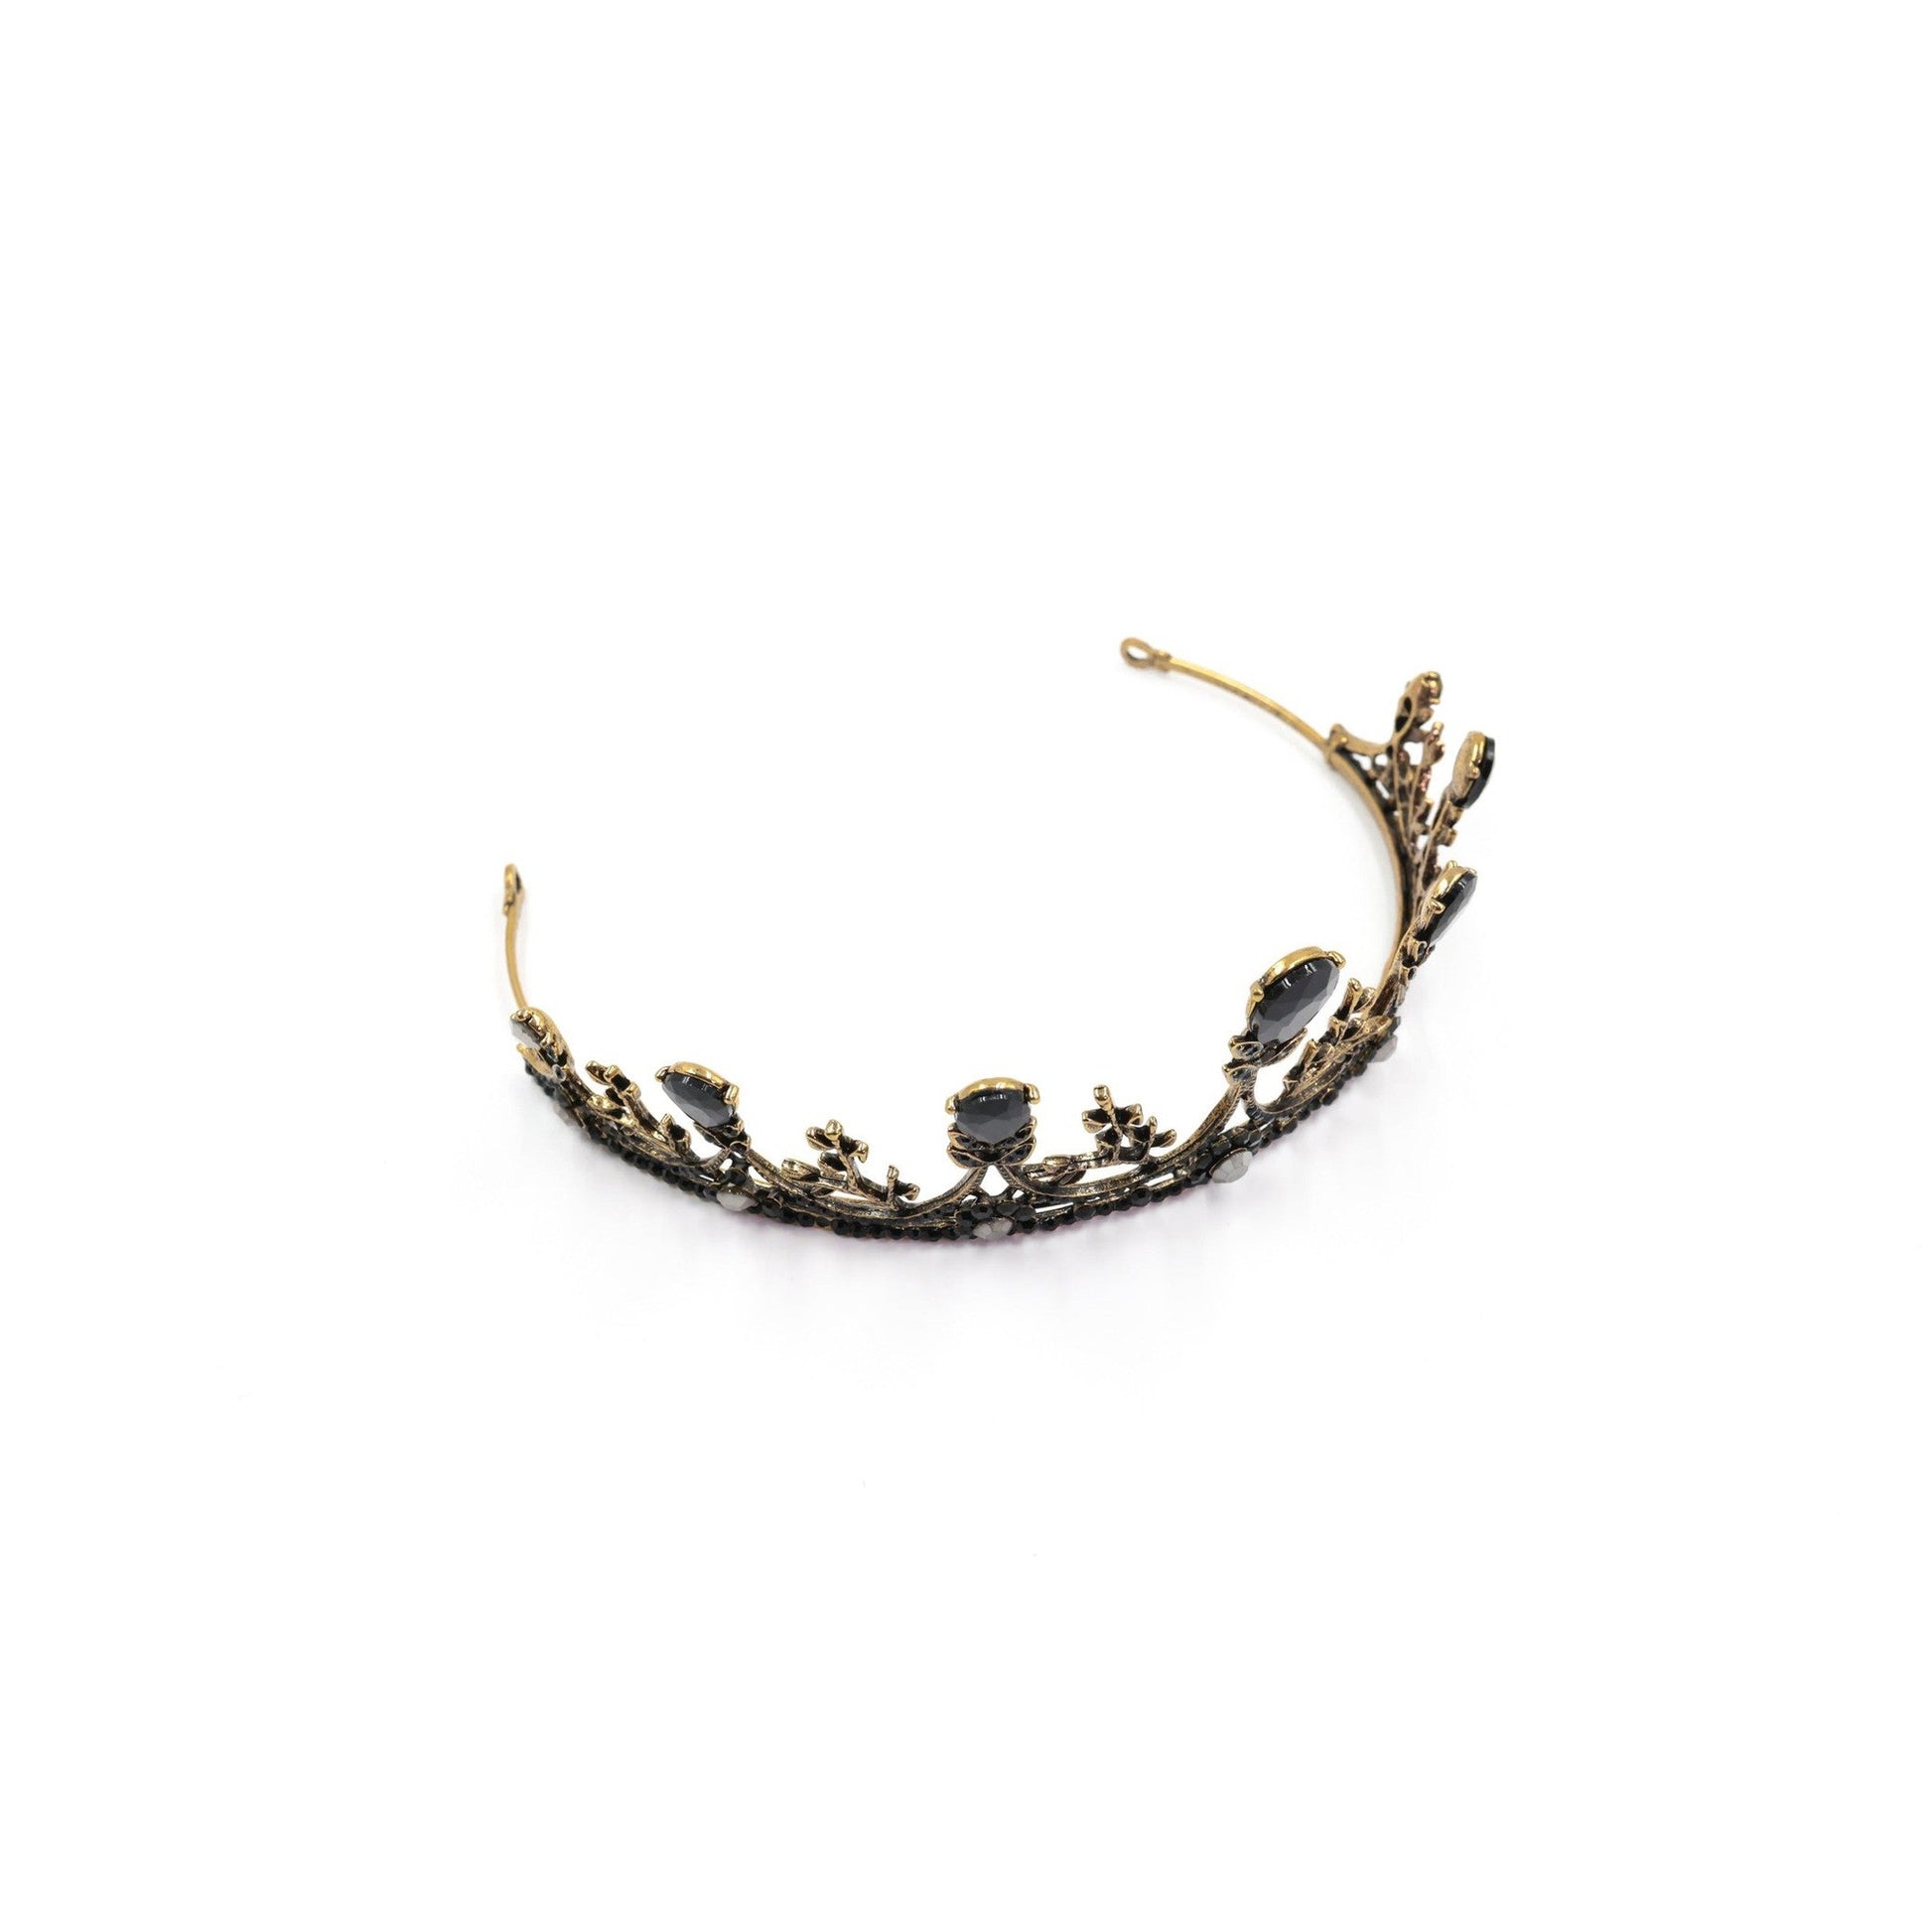 Midnight Blossom Tiara Crown in Gold with Black Gems | Royalty Crown Party or Bridal Hair Accessory